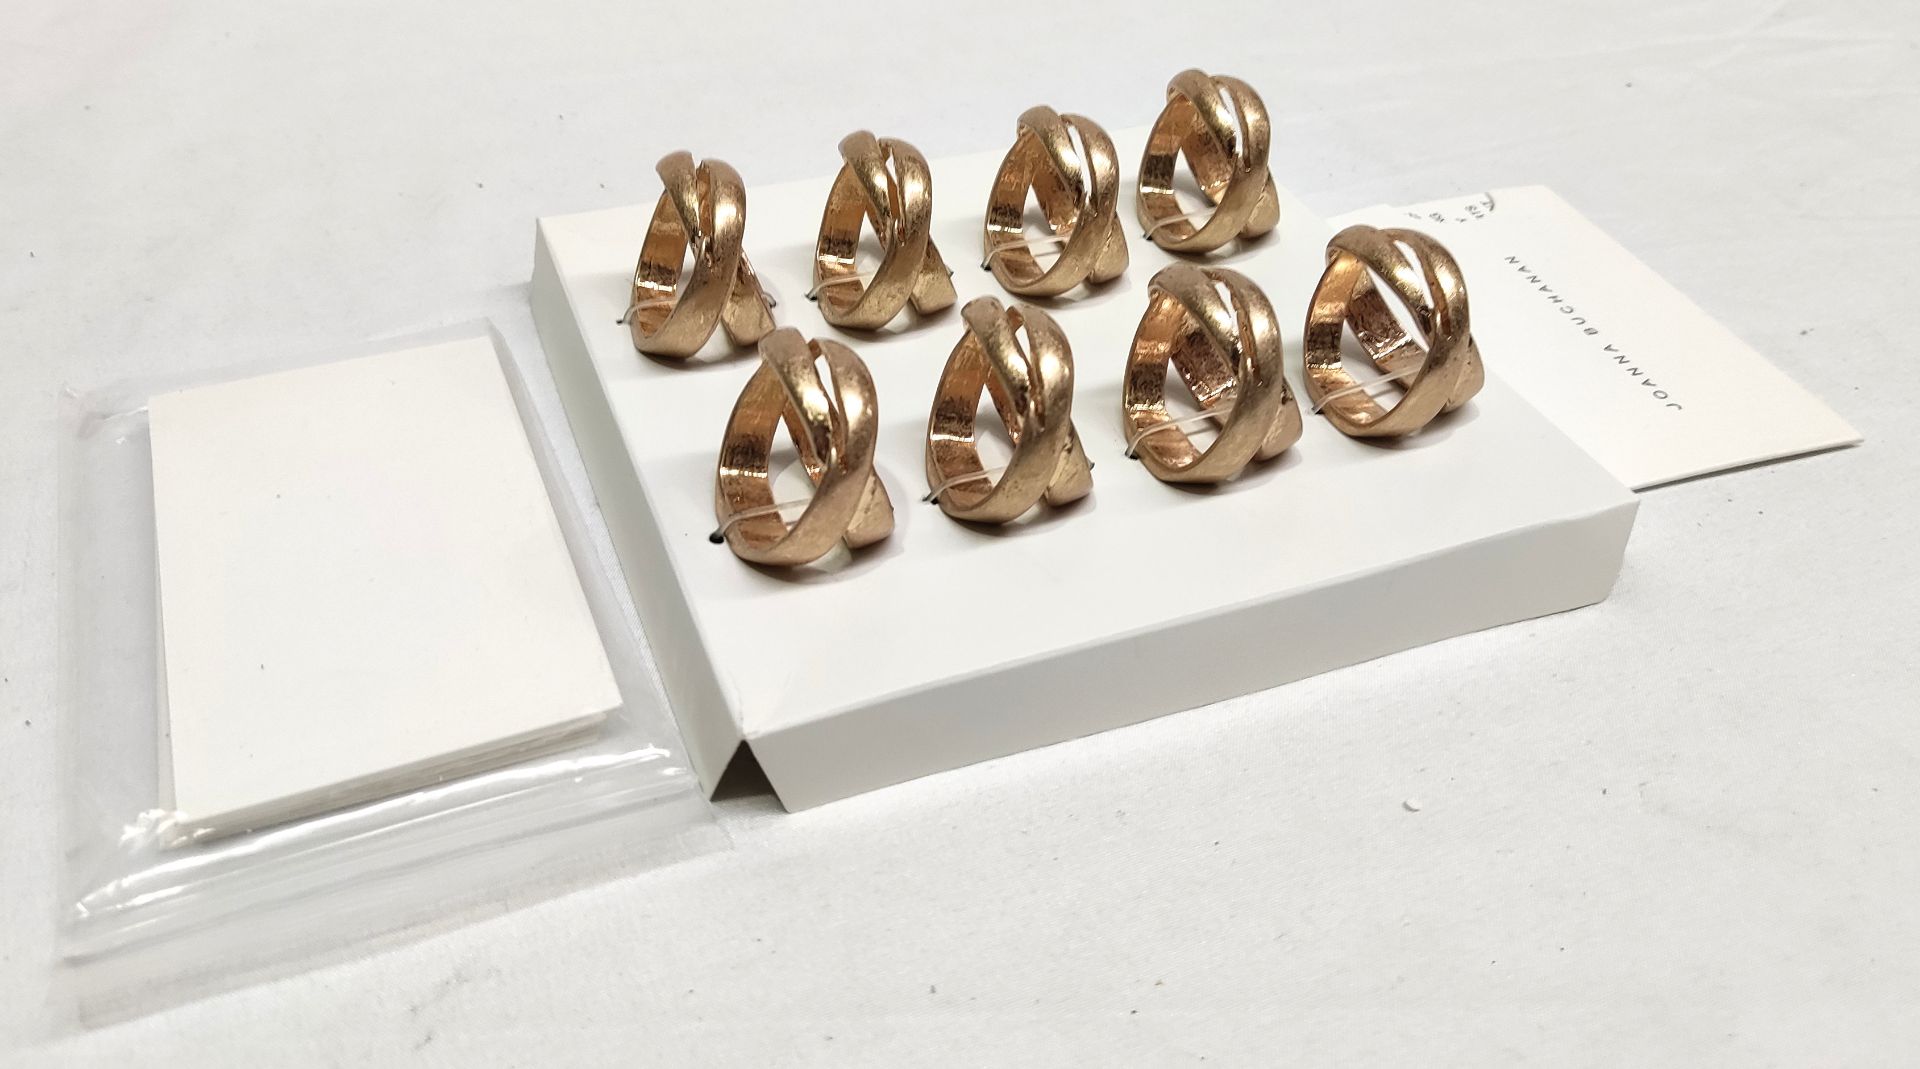 1 x JOANNA BUCHANAN Knot Placecard Holders - Set Of 8 - New/Boxed - Original RRP £168 - Ref: - Image 18 of 19